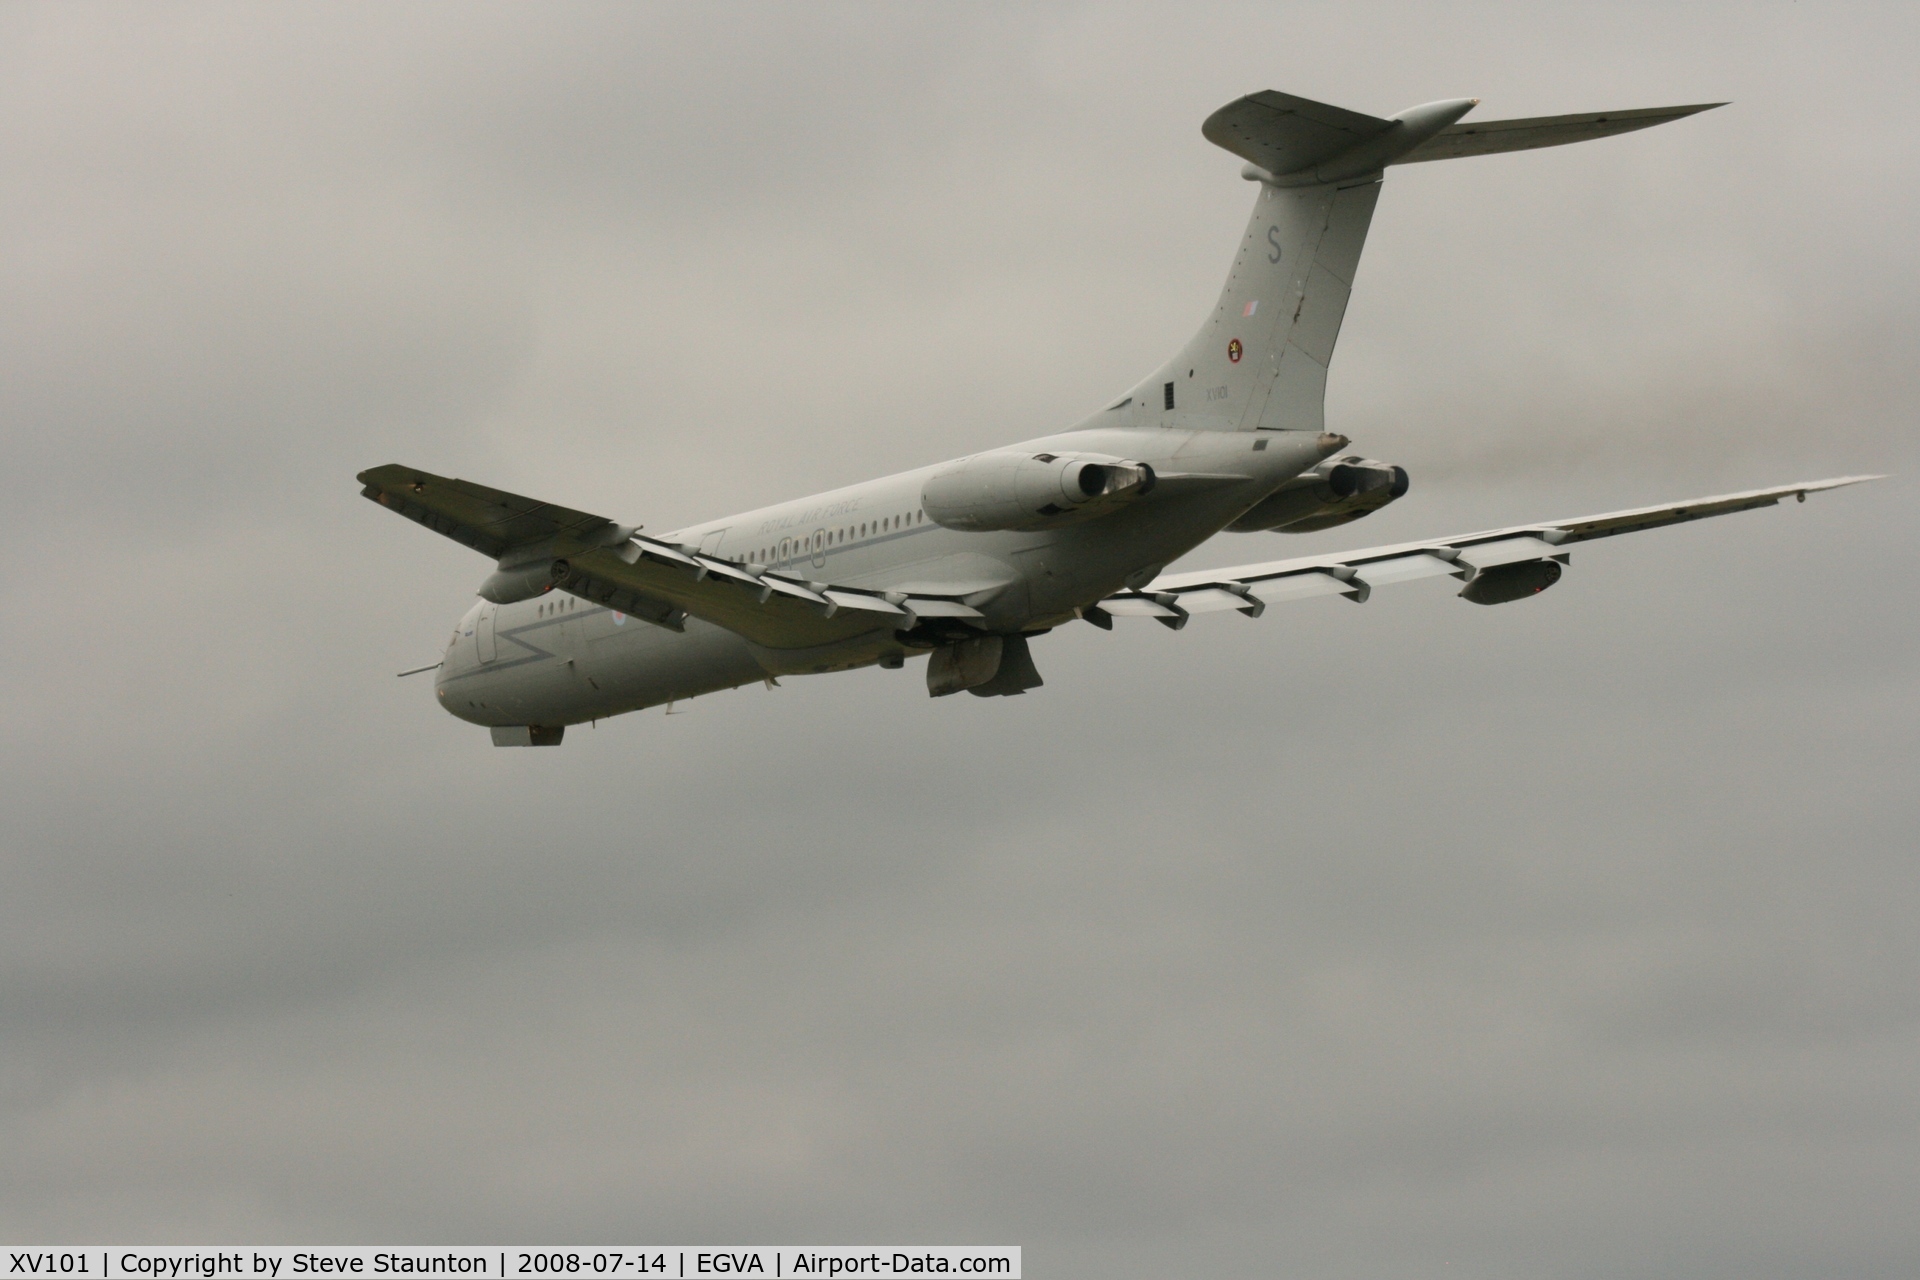 XV101, 1967 Vickers VC10 C.1K C/N 831, Taken at the Royal International Air Tattoo 2008 during arrivals and departures (show days cancelled due to bad weather)